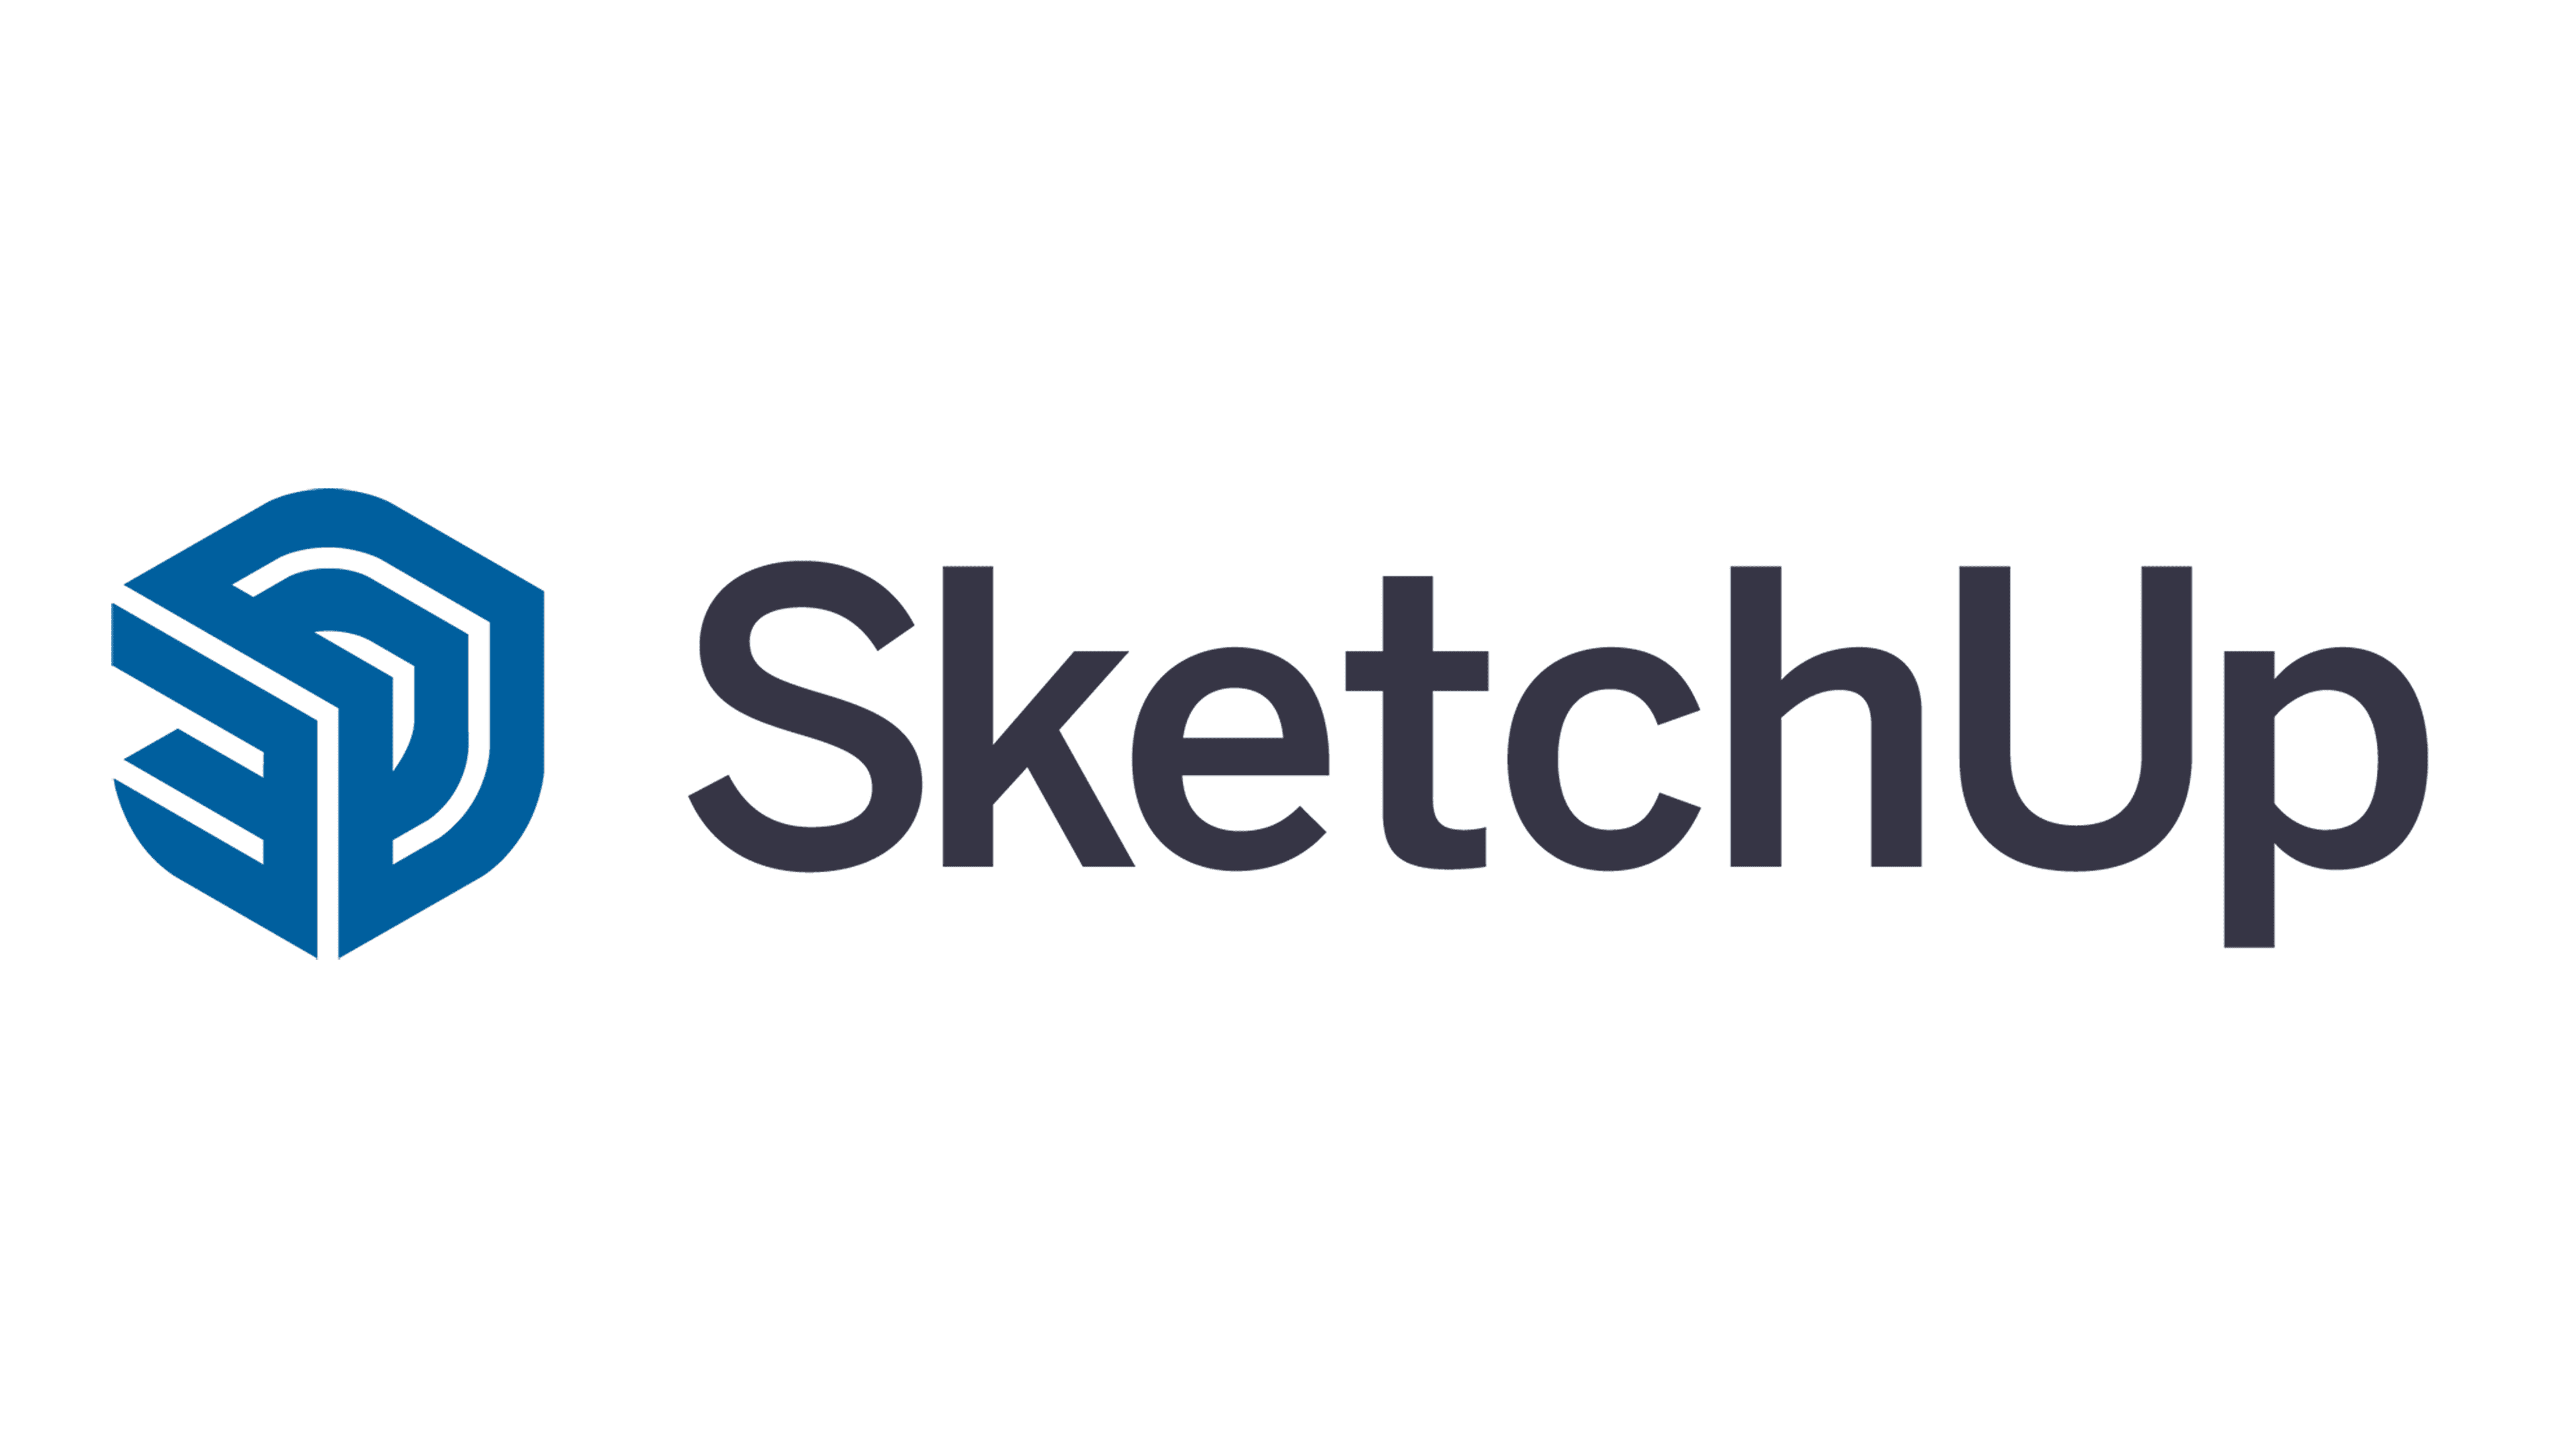 SketchUp is a user-friendly 3D modeling software that is popular among architects, interior designers, and product designers. It offers a range of intuitive tools for creating 3D models, and it is particularly known for its ease of use and quick learning curve